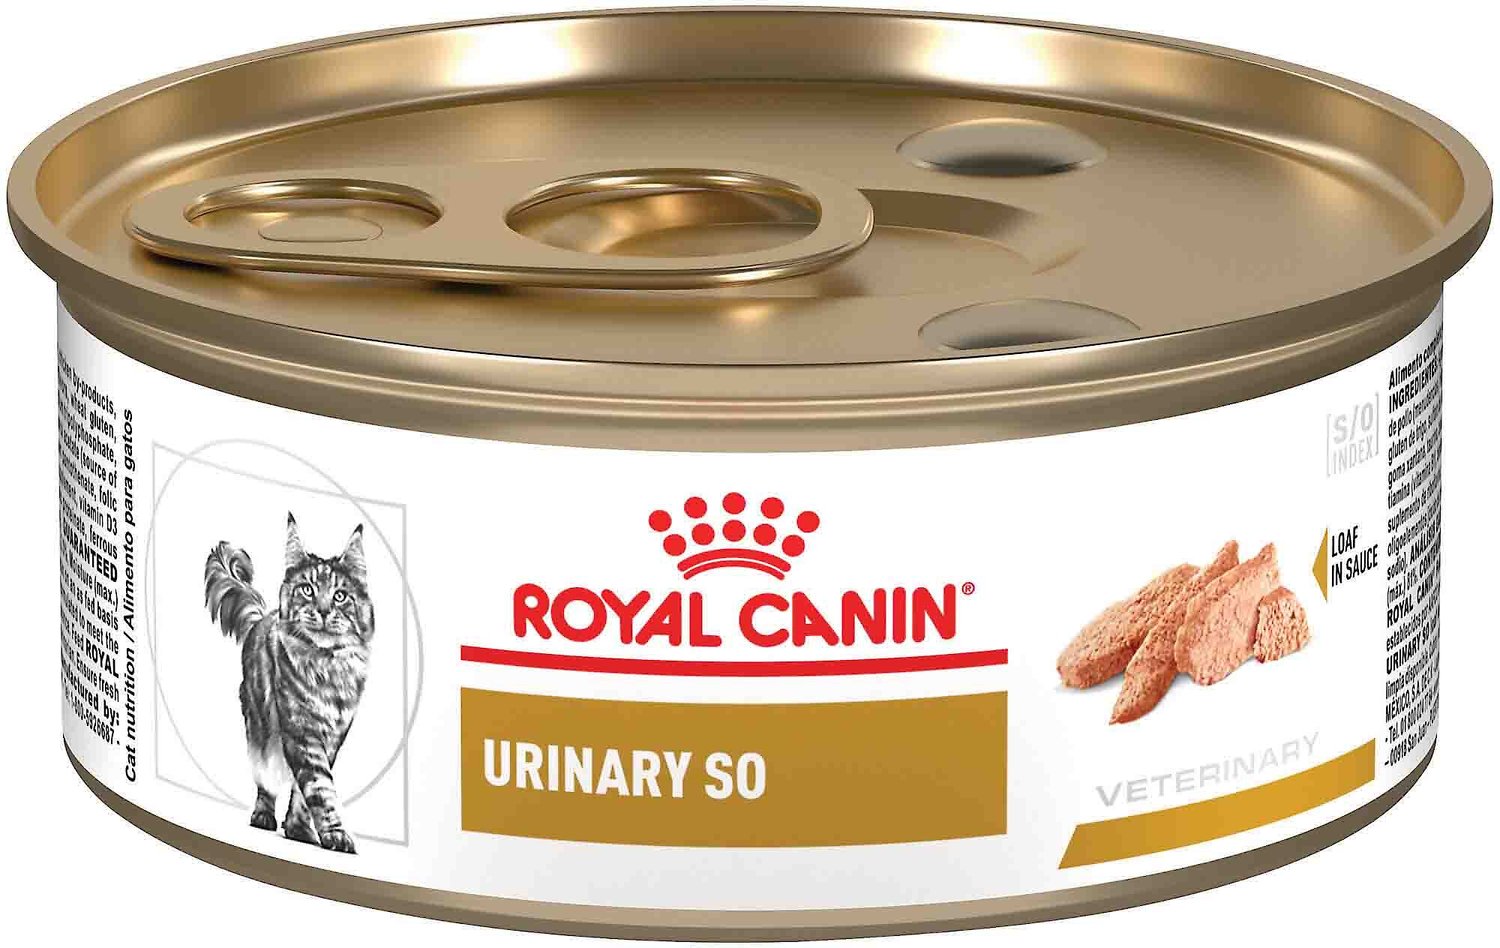 Royal Canin Veterinary Diet Urinary SO in Gel Canned Cat Food, 5.8oz